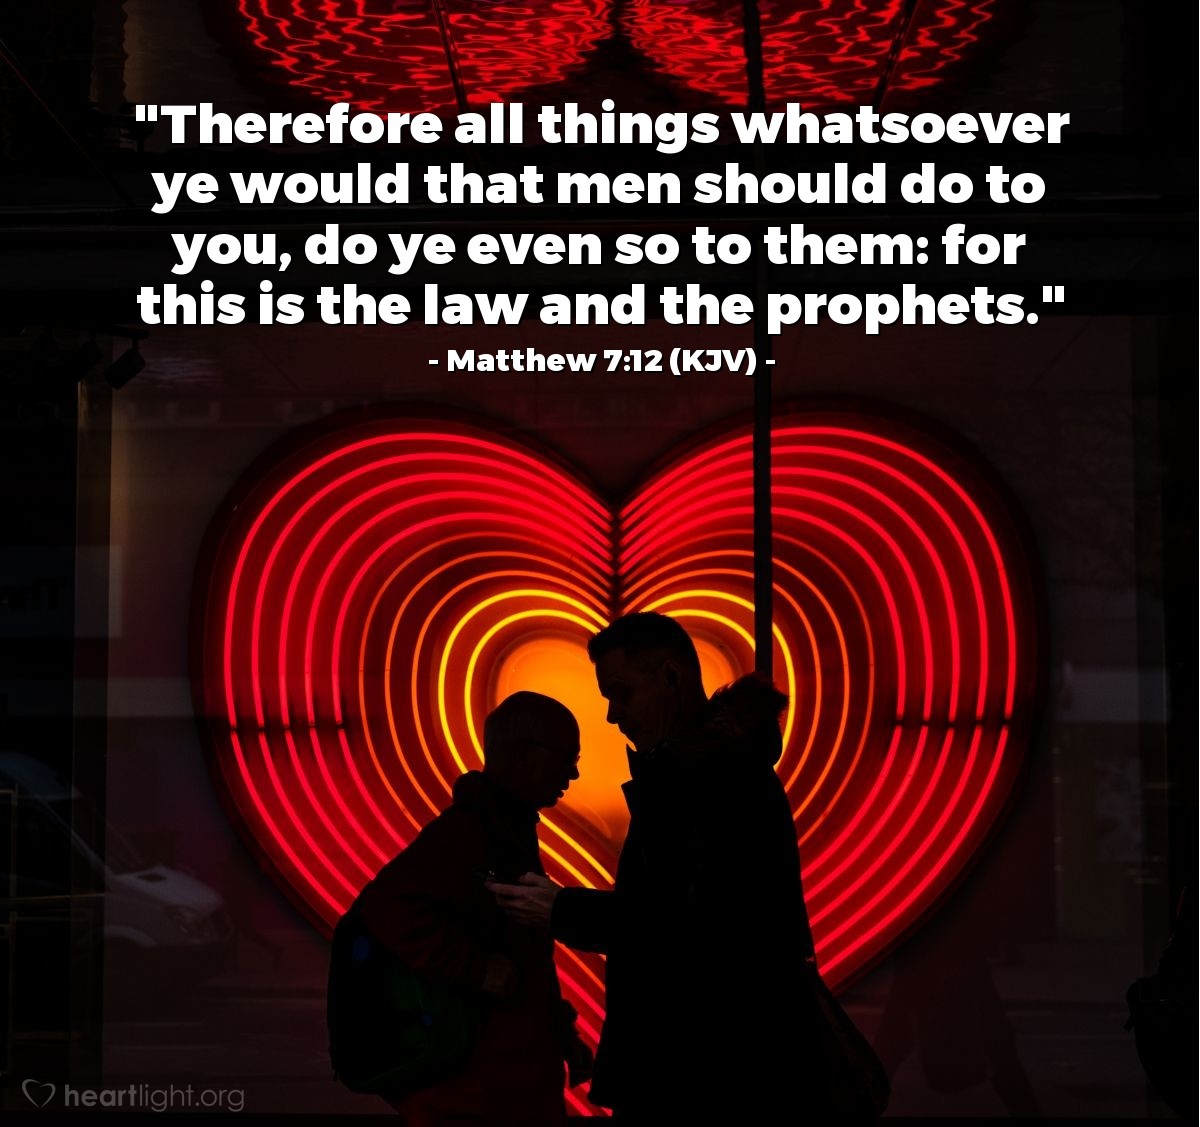 Illustration of Matthew 7:12 (KJV) — "Therefore all things whatsoever ye would that men should do to you, do ye even so to them: for this is the law and the prophets."